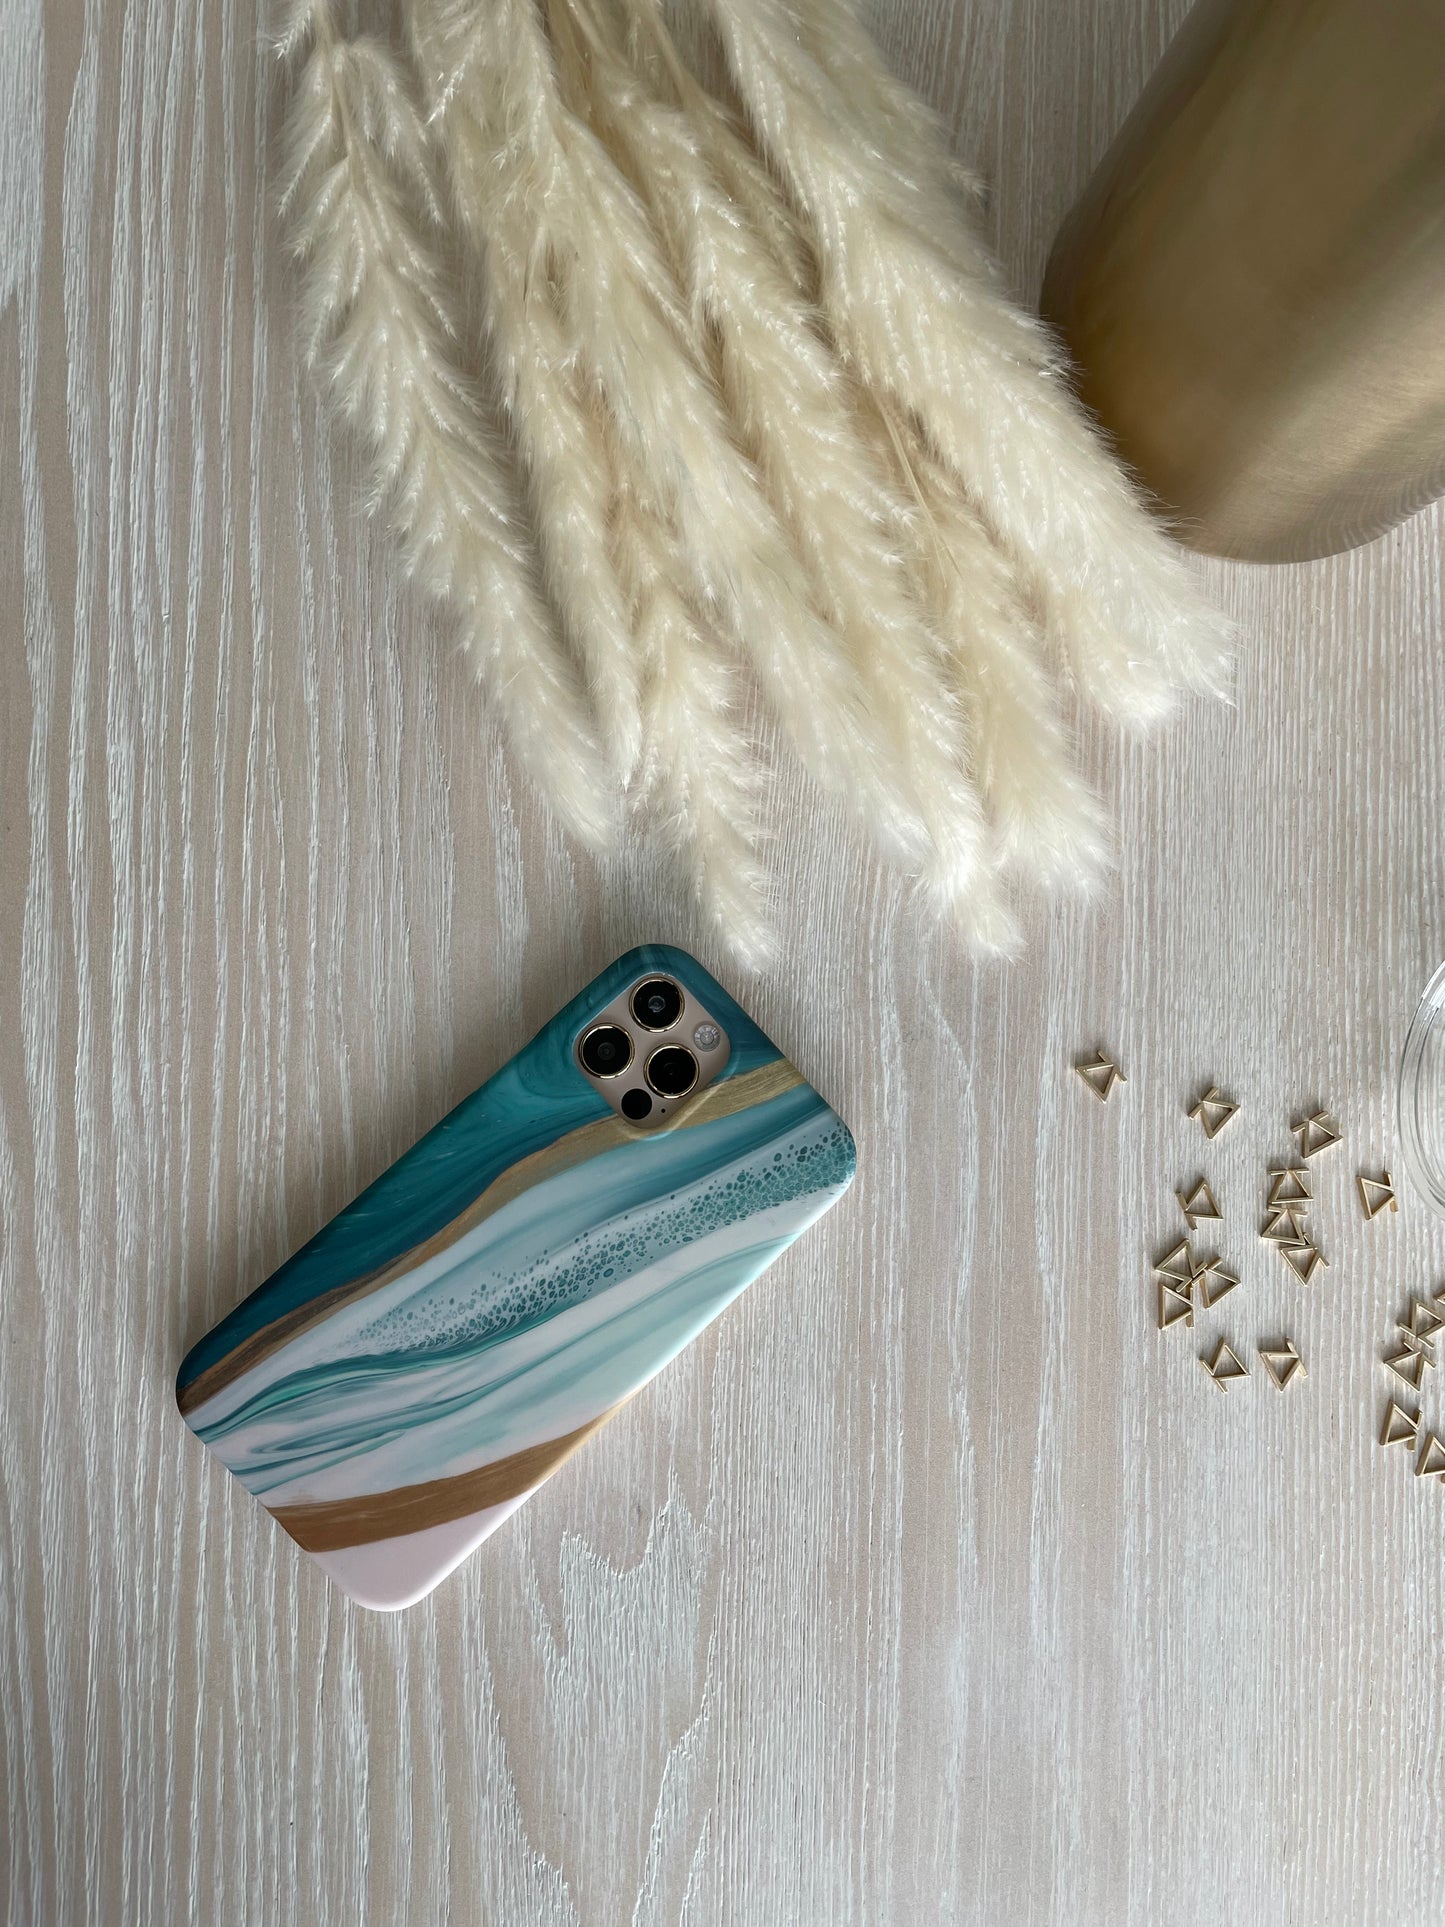 Teal and Gold iPhone Silicon Case